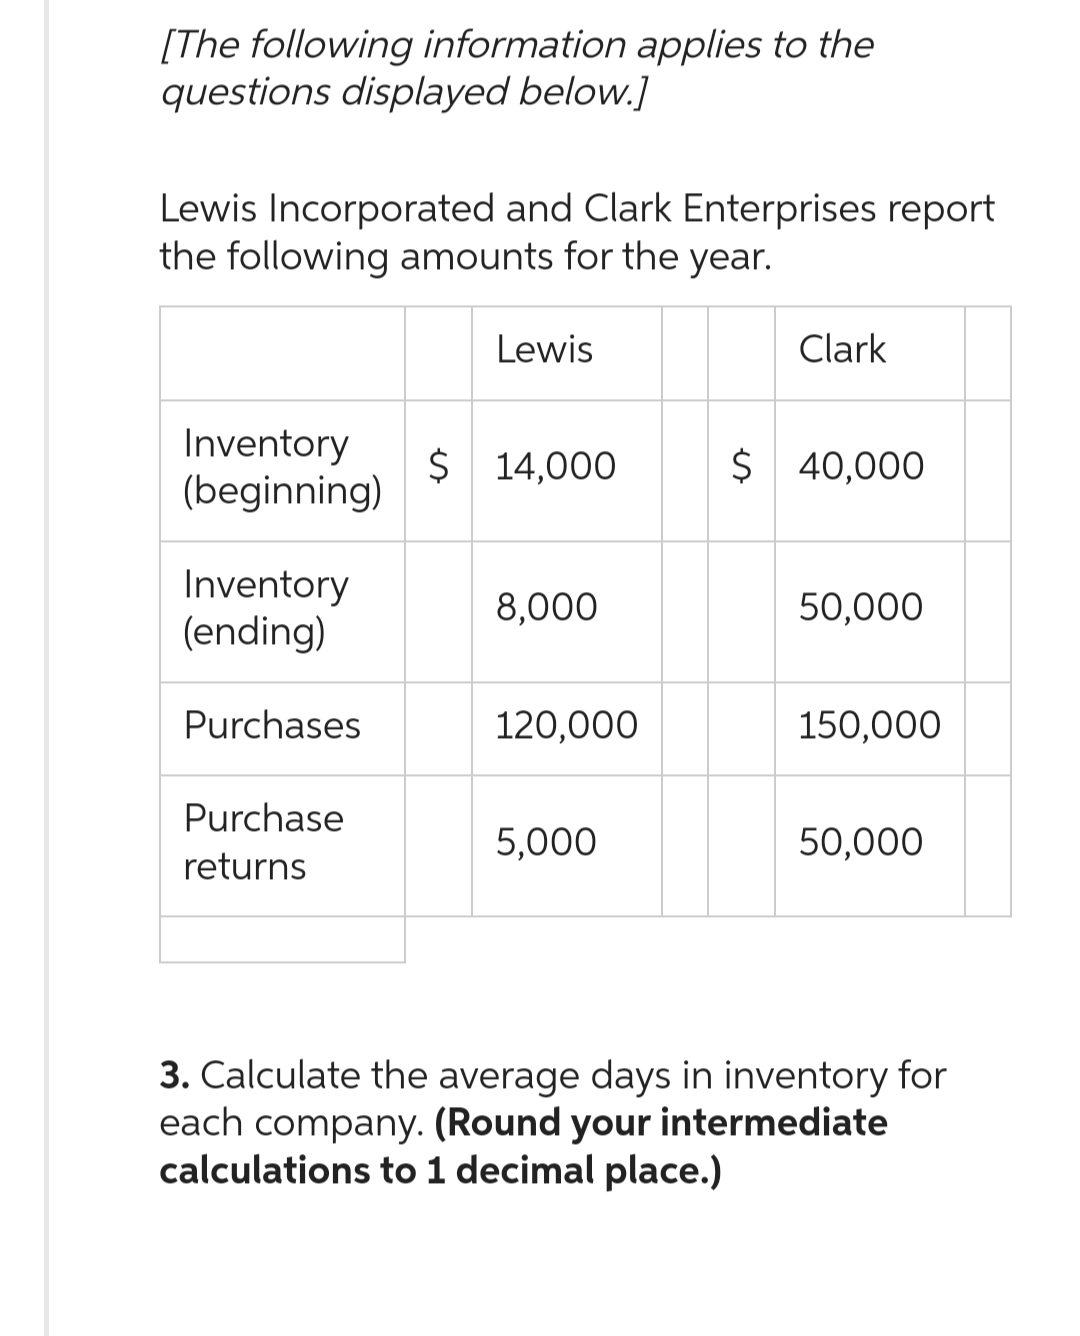 [The following information applies to the
questions displayed below.]
Lewis Incorporated and Clark Enterprises report
the following amounts for the year.
Inventory
(beginning)
Inventory
(ending)
Purchases
Purchase
returns
Lewis
$ 14,000
8,000
120,000
5,000
Clark
$ 40,000
50,000
150,000
50,000
3. Calculate the average days in inventory for
each company. (Round your intermediate
calculations to 1 decimal place.)